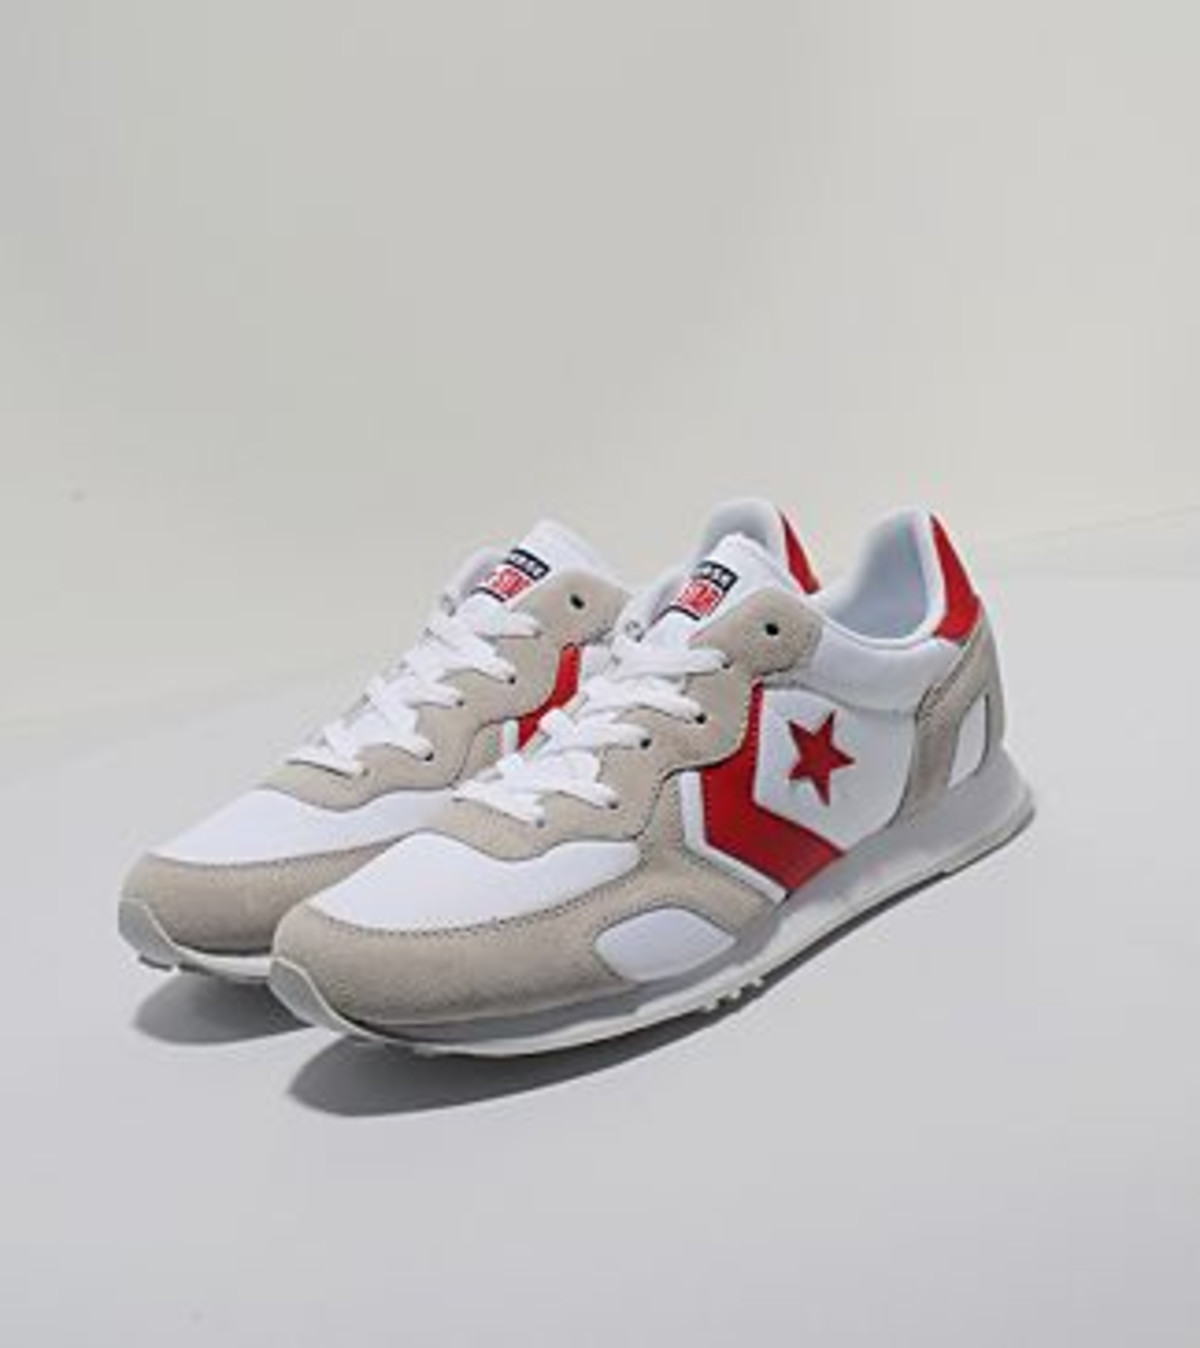 Converse Auckland Racer “Grey/Red-White” | Complex